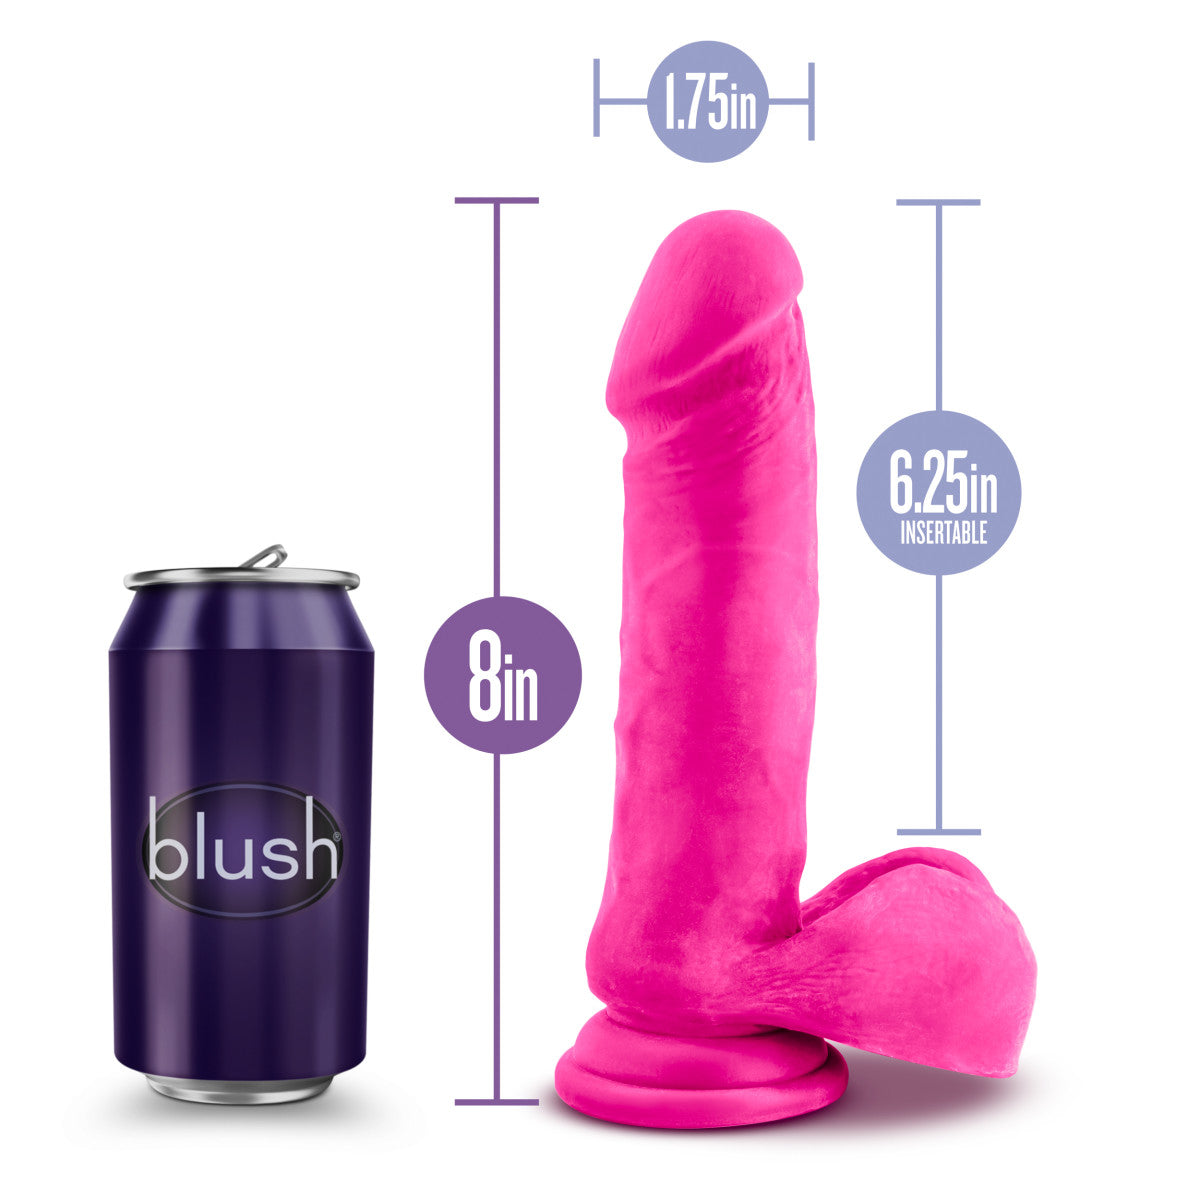 Pink realistic dildo with a rounded head, veins along a straight but flexible shaft, realistic balls, and a suction cup base. Additional images show alternate angles.